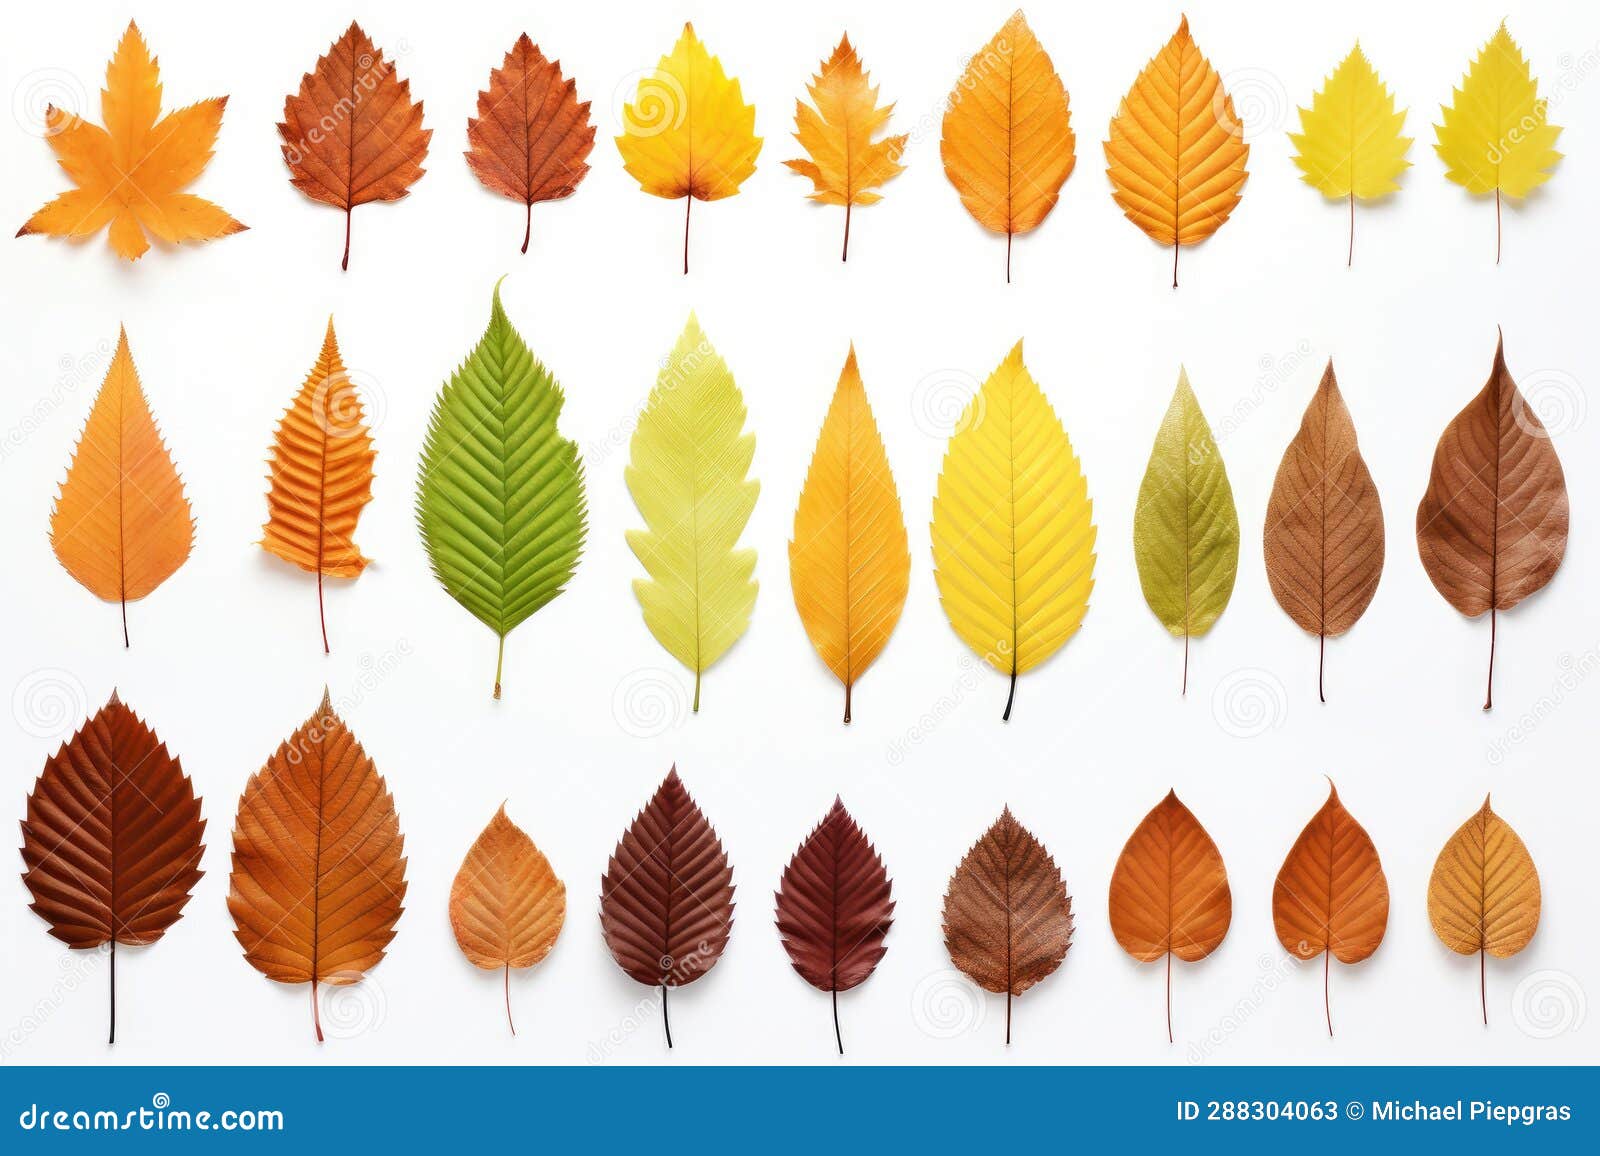 A Collection of Seperated Autumn Leaves Isolated on a White Background ...